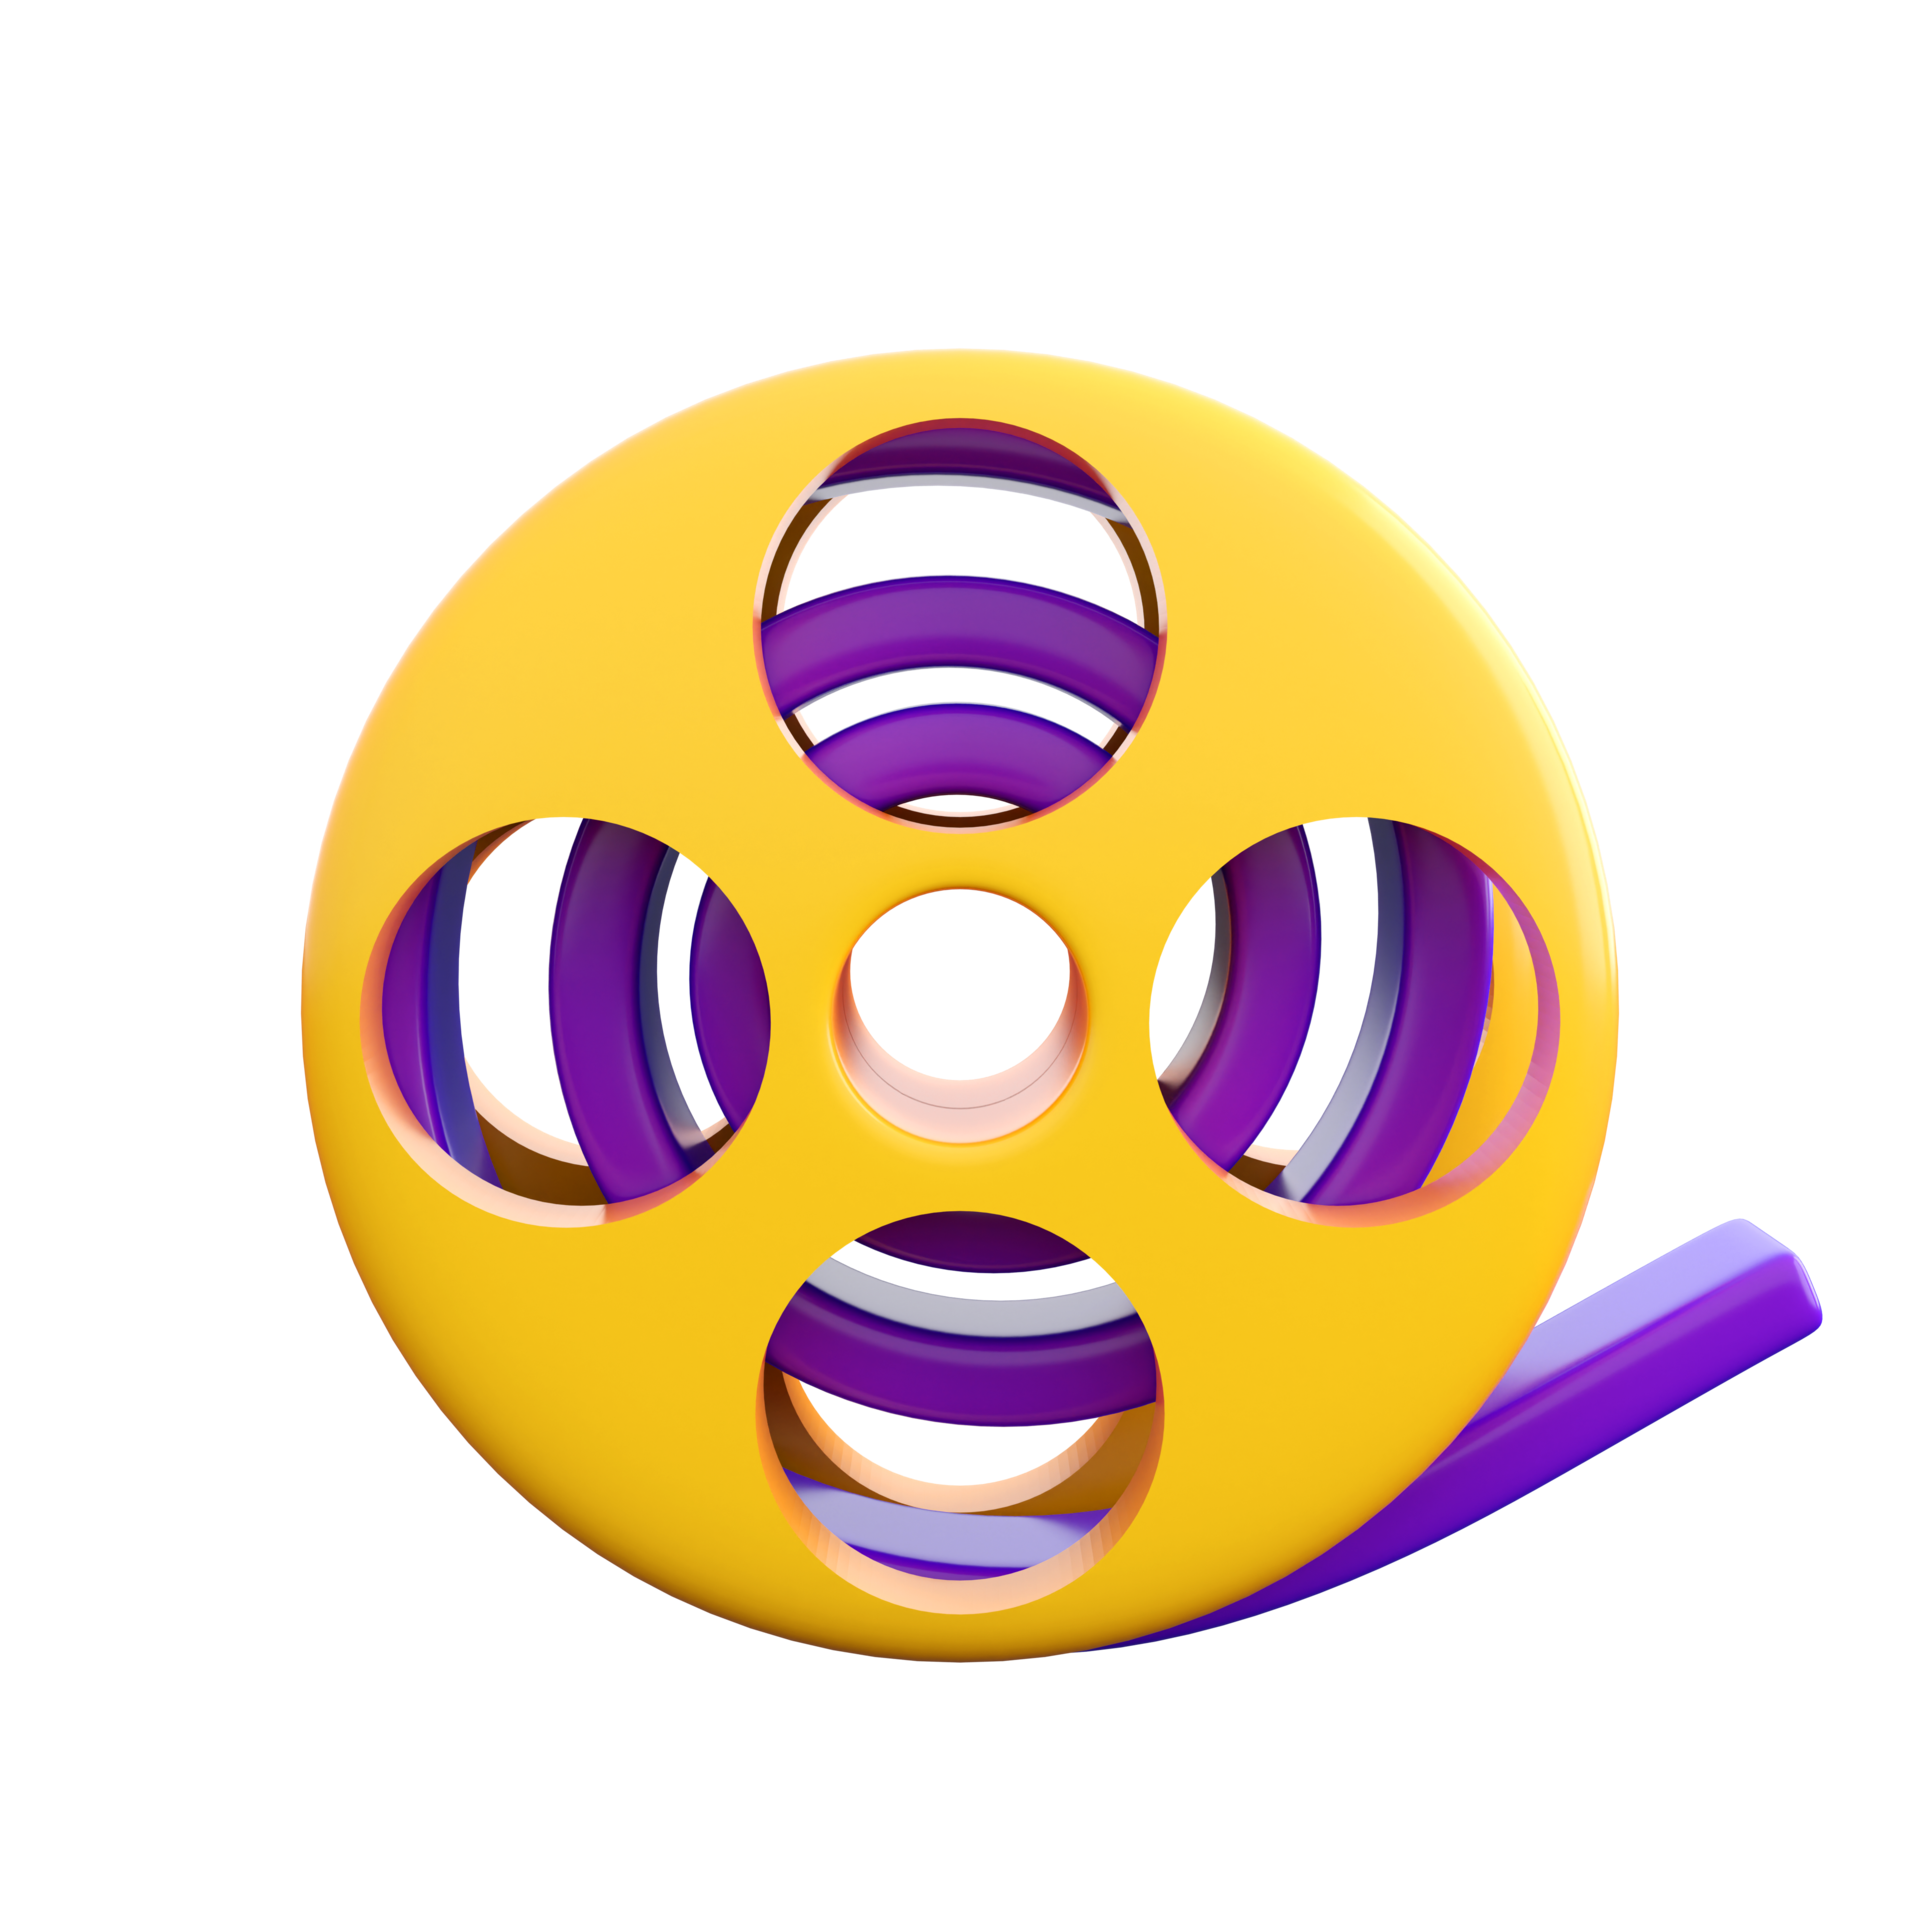 Free 3d film roll. Cinema, movie, entertainment concept in trending cartoon  style. High quality isolated 3d render 12627814 PNG with Transparent  Background